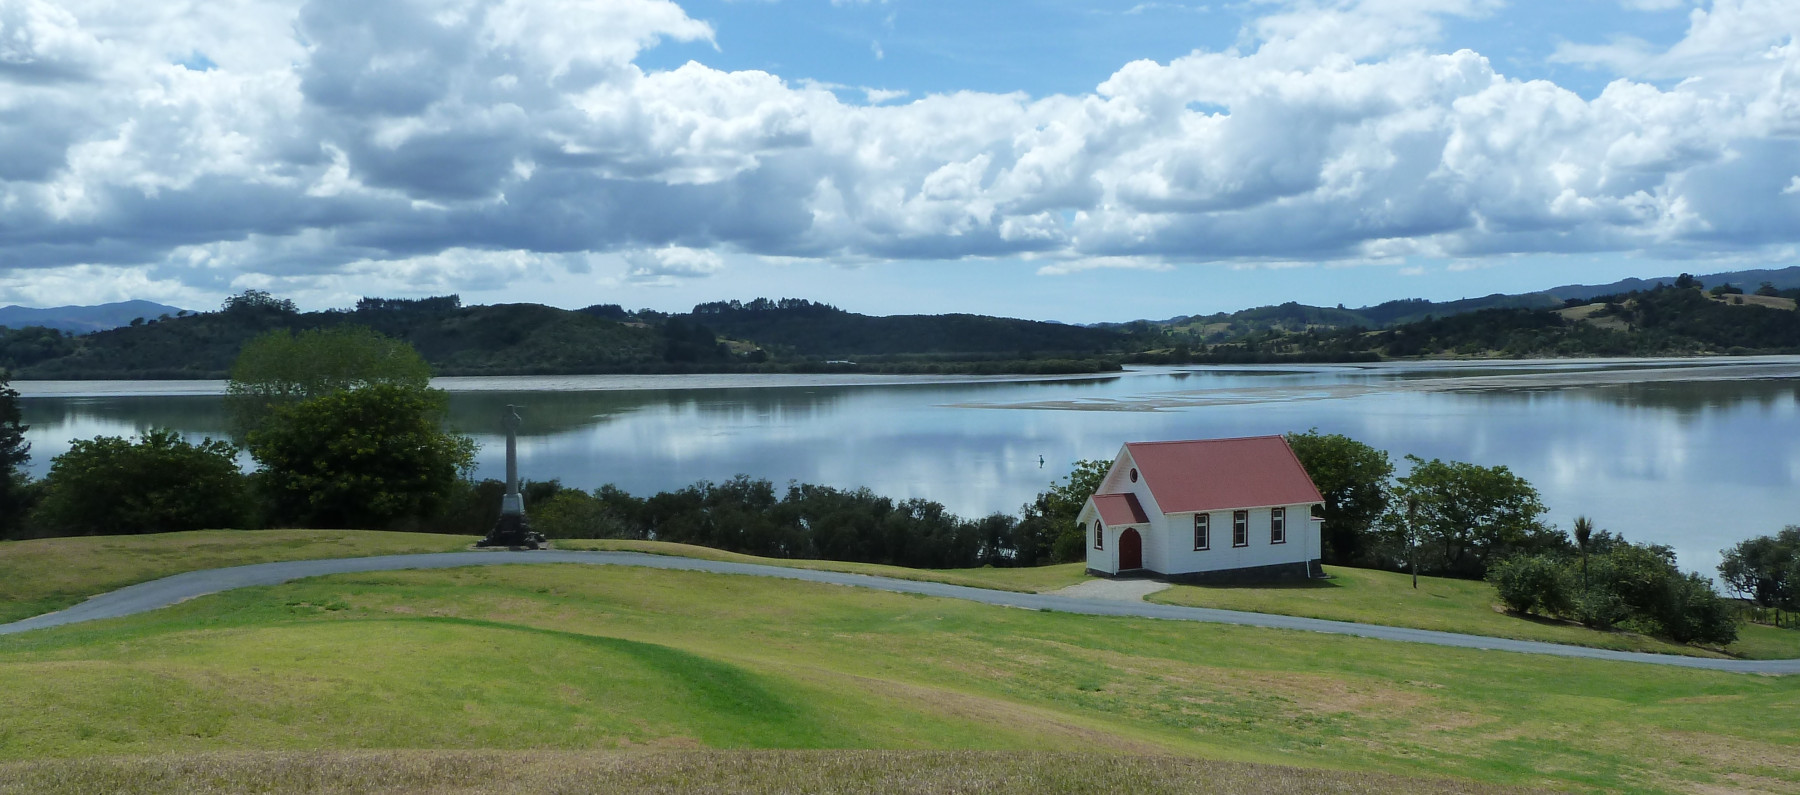 Hokianga Harbour with chapel in the foreground.